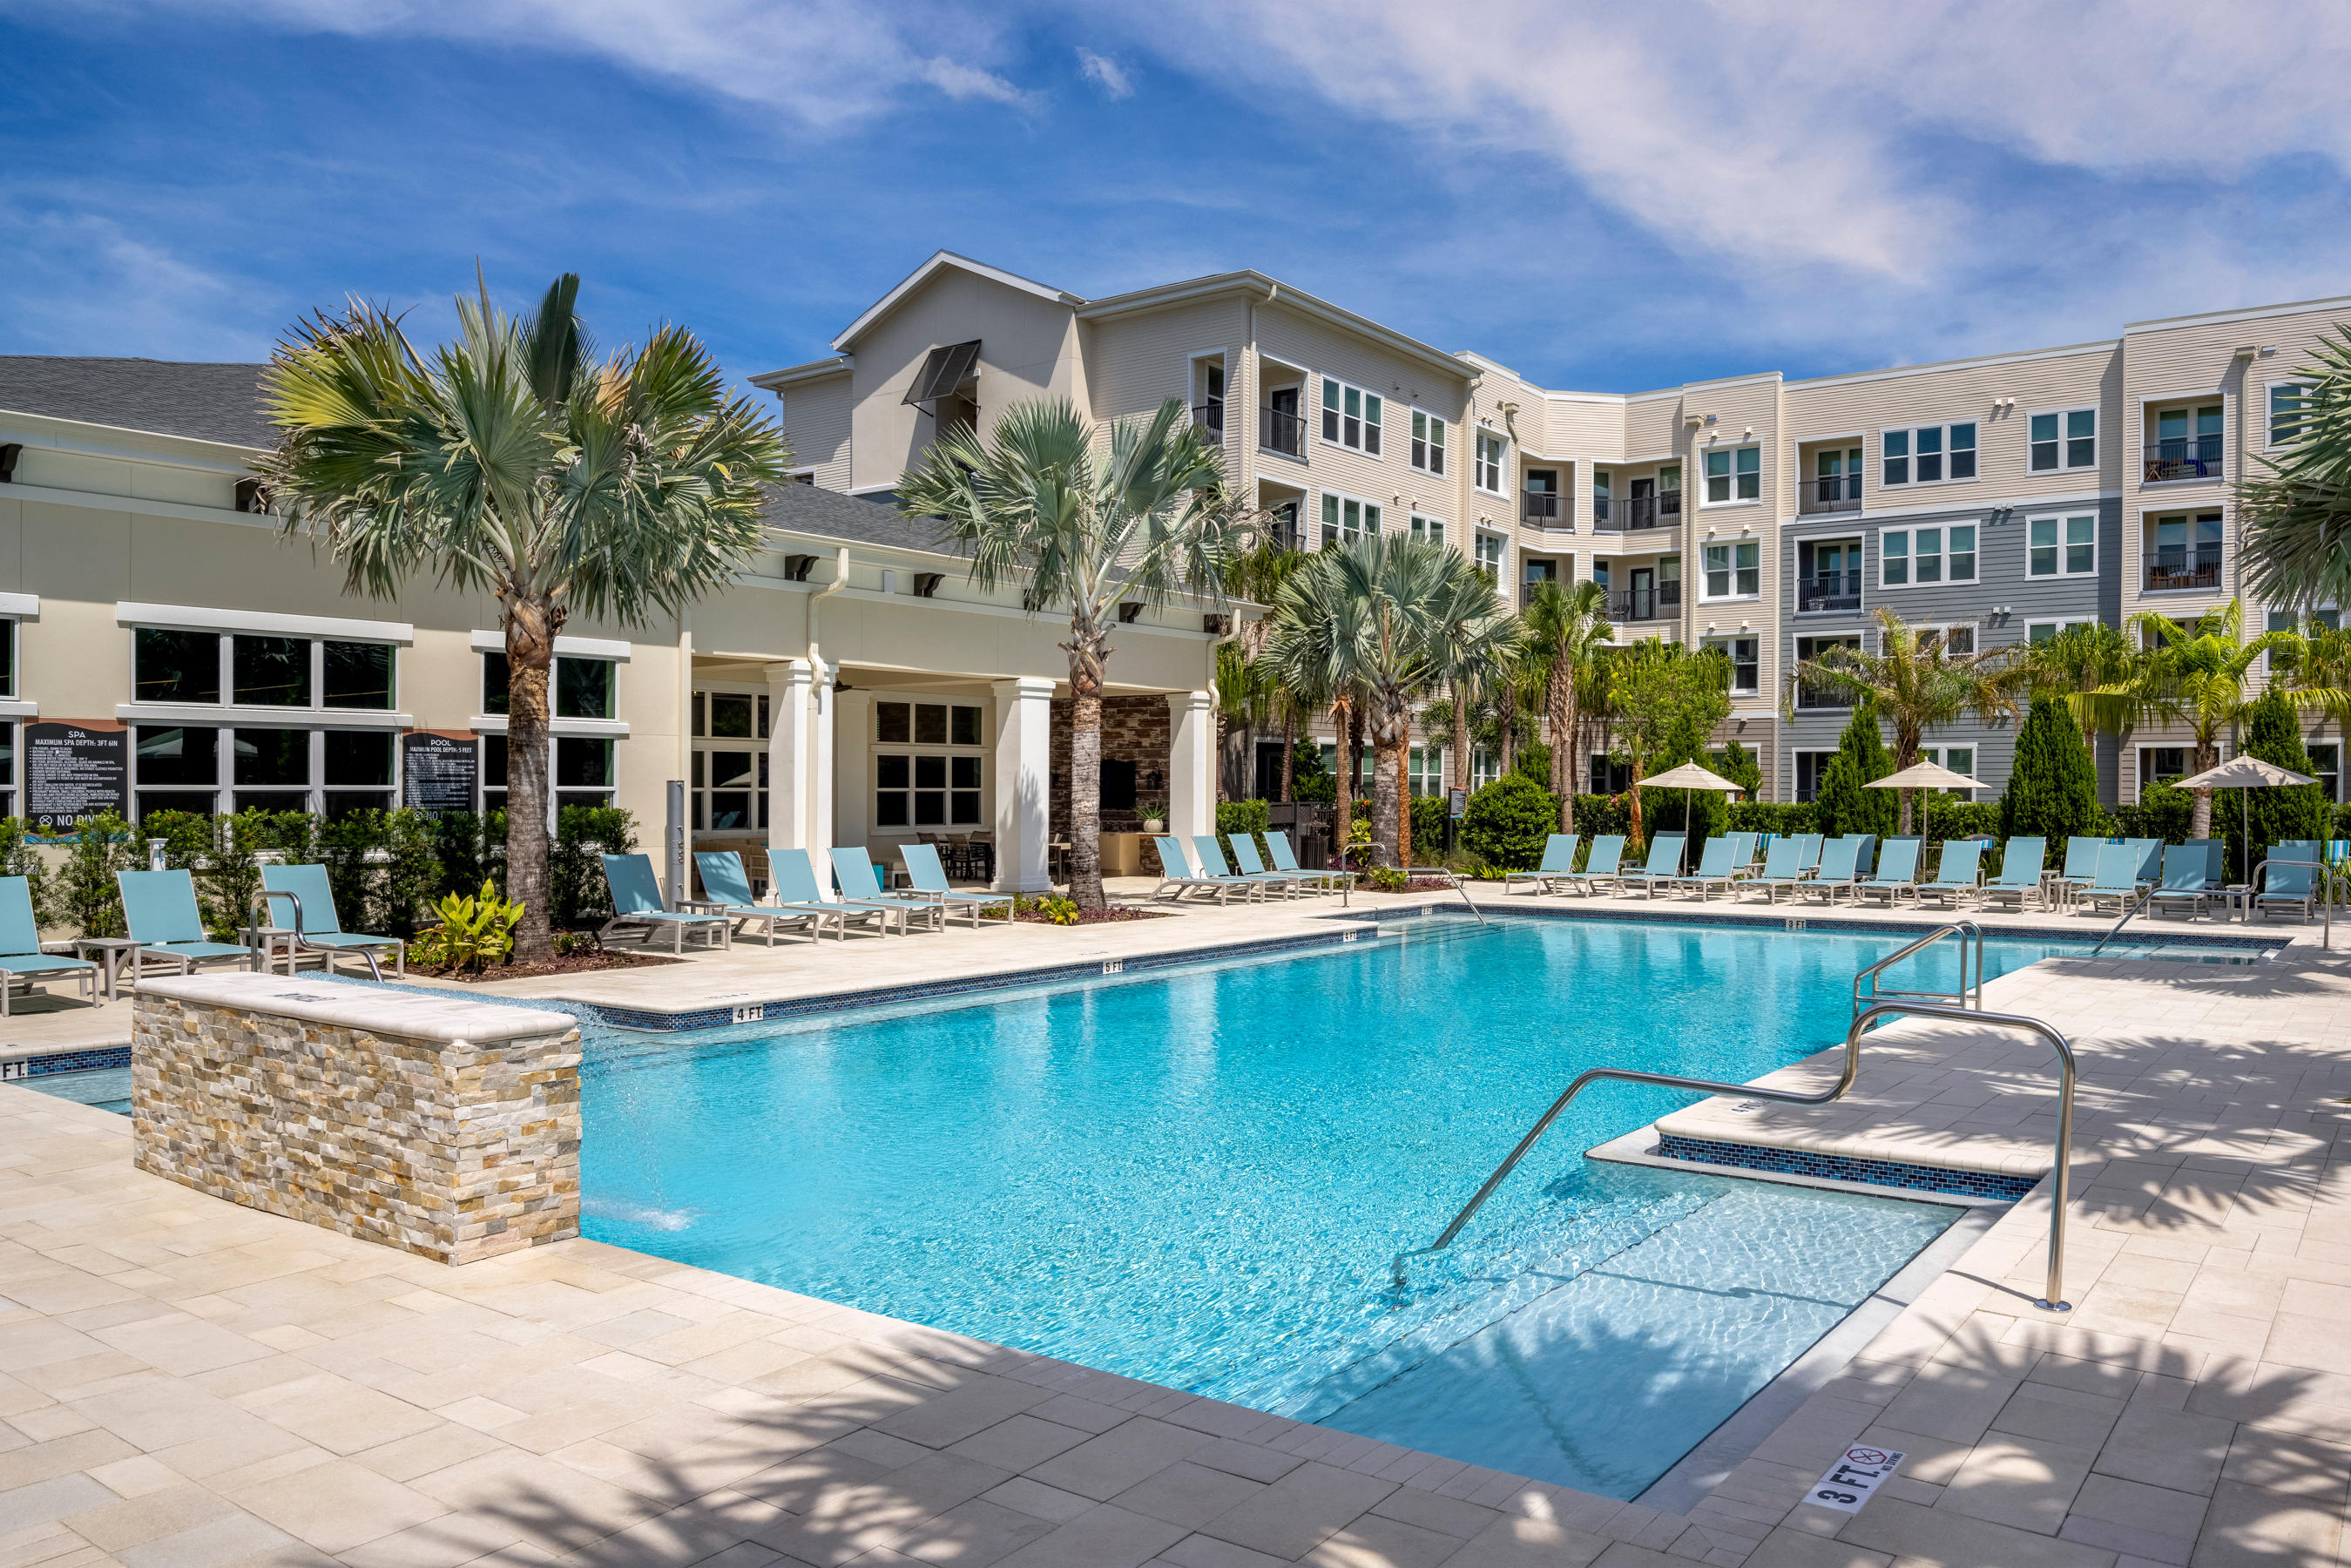 Resort-Style Pool at Waverly Terrace luxury apartments in Temple Terrace, FL